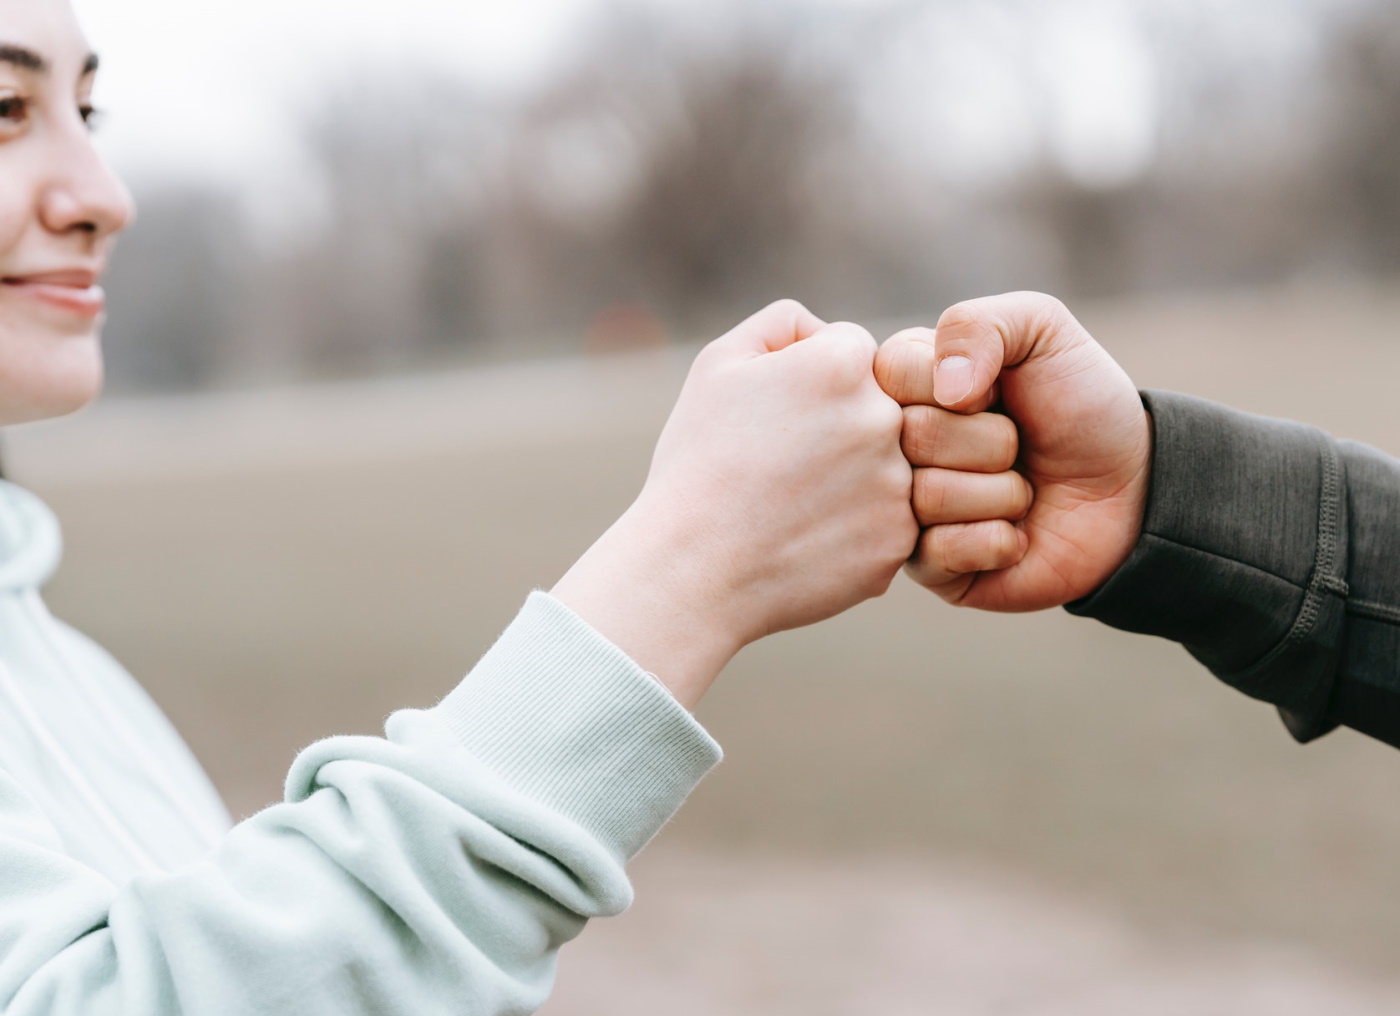 Two people engaged in a fist bump